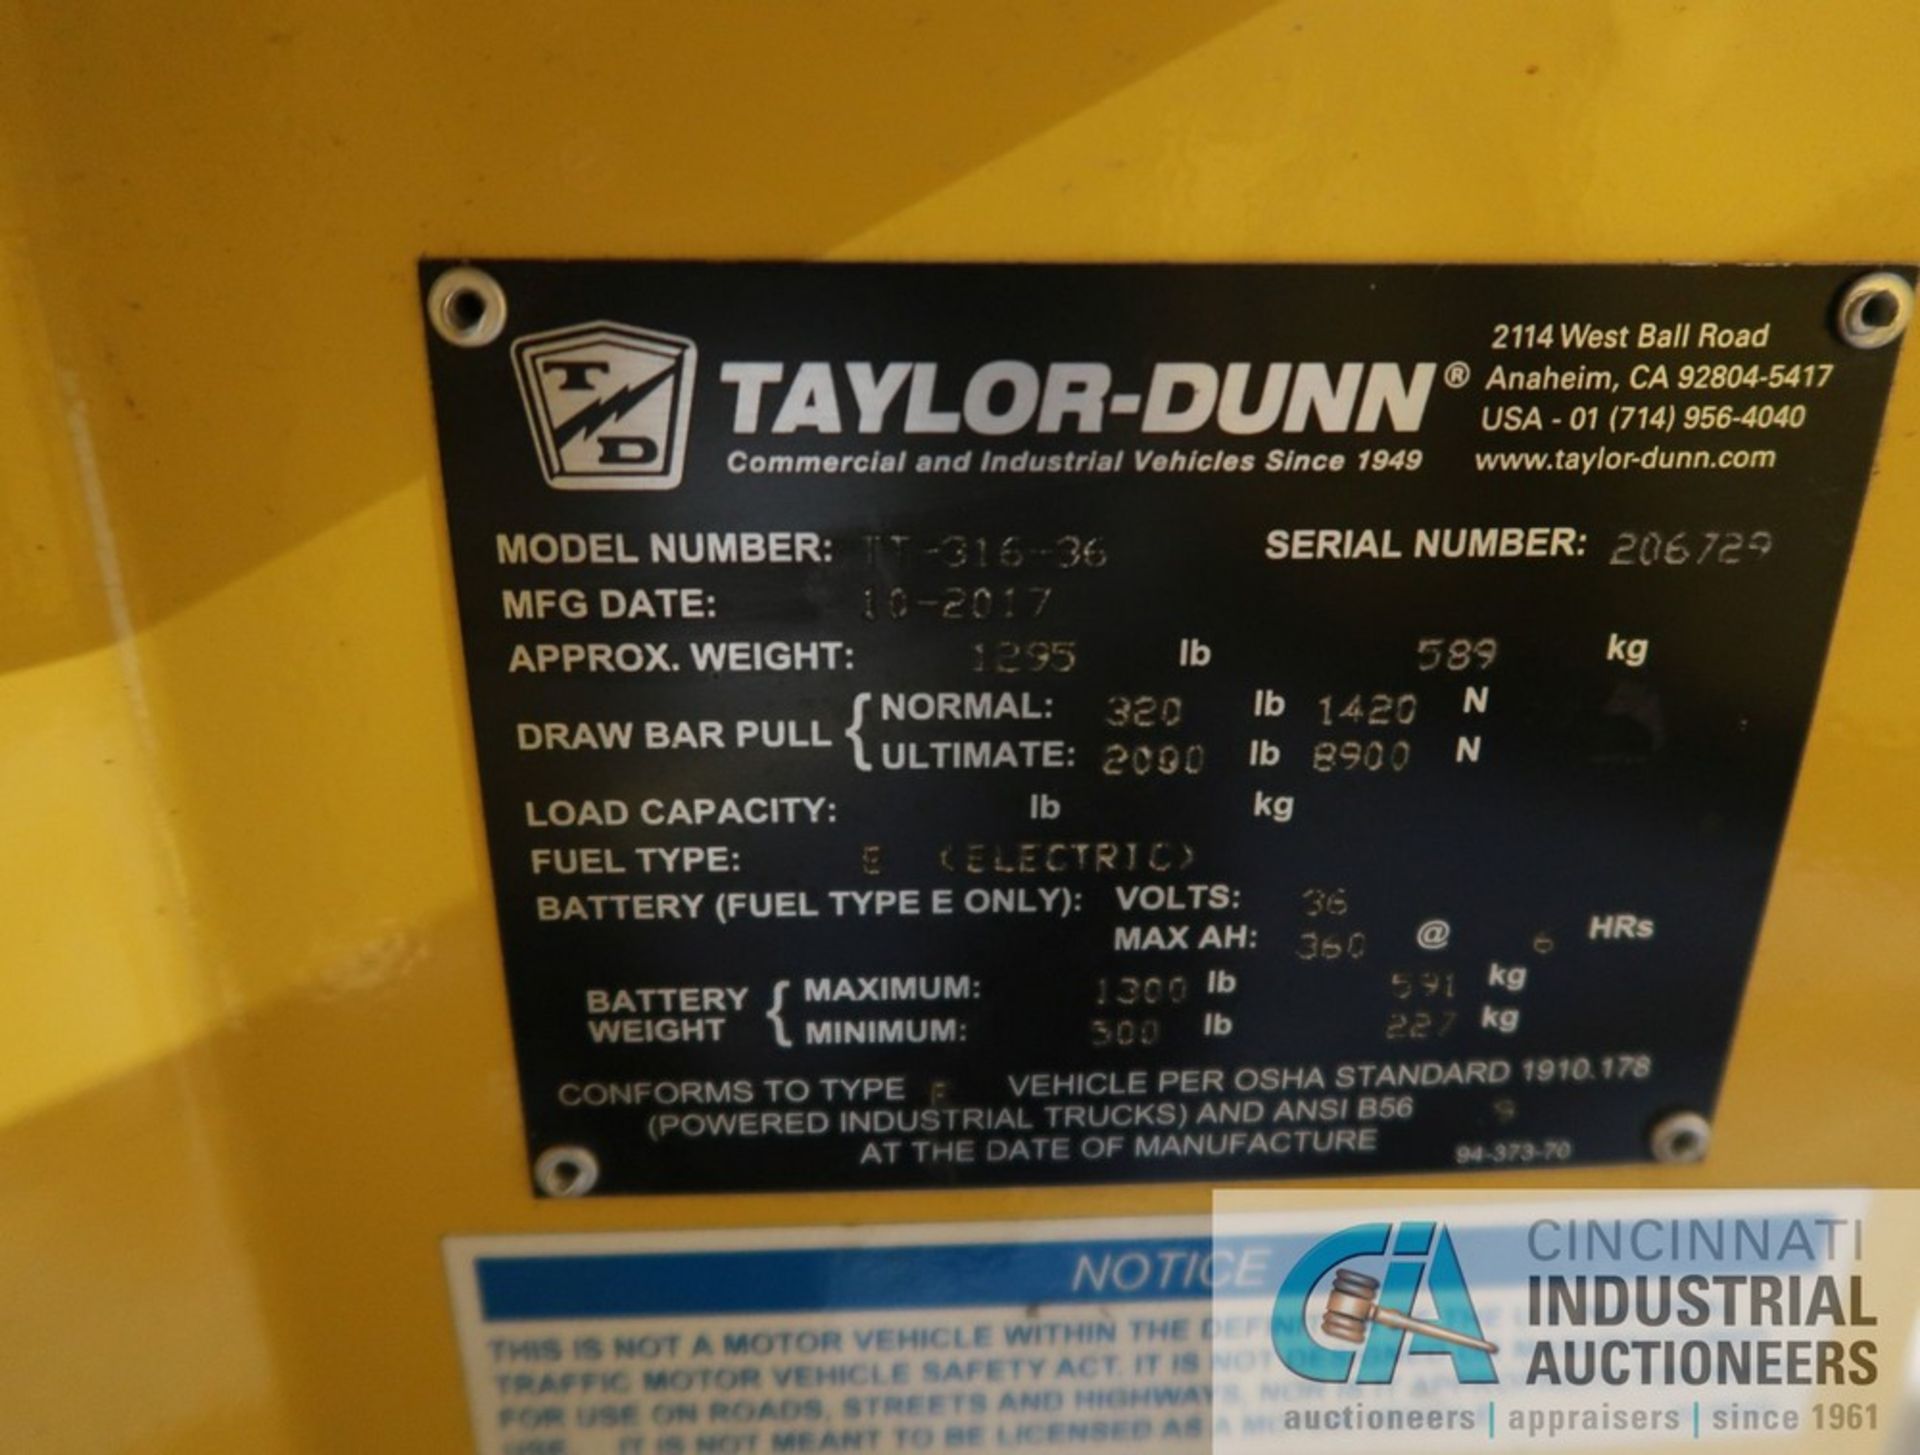 TAYLOR-DUNN MODEL TT-316-36 SIT DOWN THREE-WHEEL MAINTENANCE VEHICLE; S/N 206729 (NEW 10-2017), WITH - Image 7 of 7